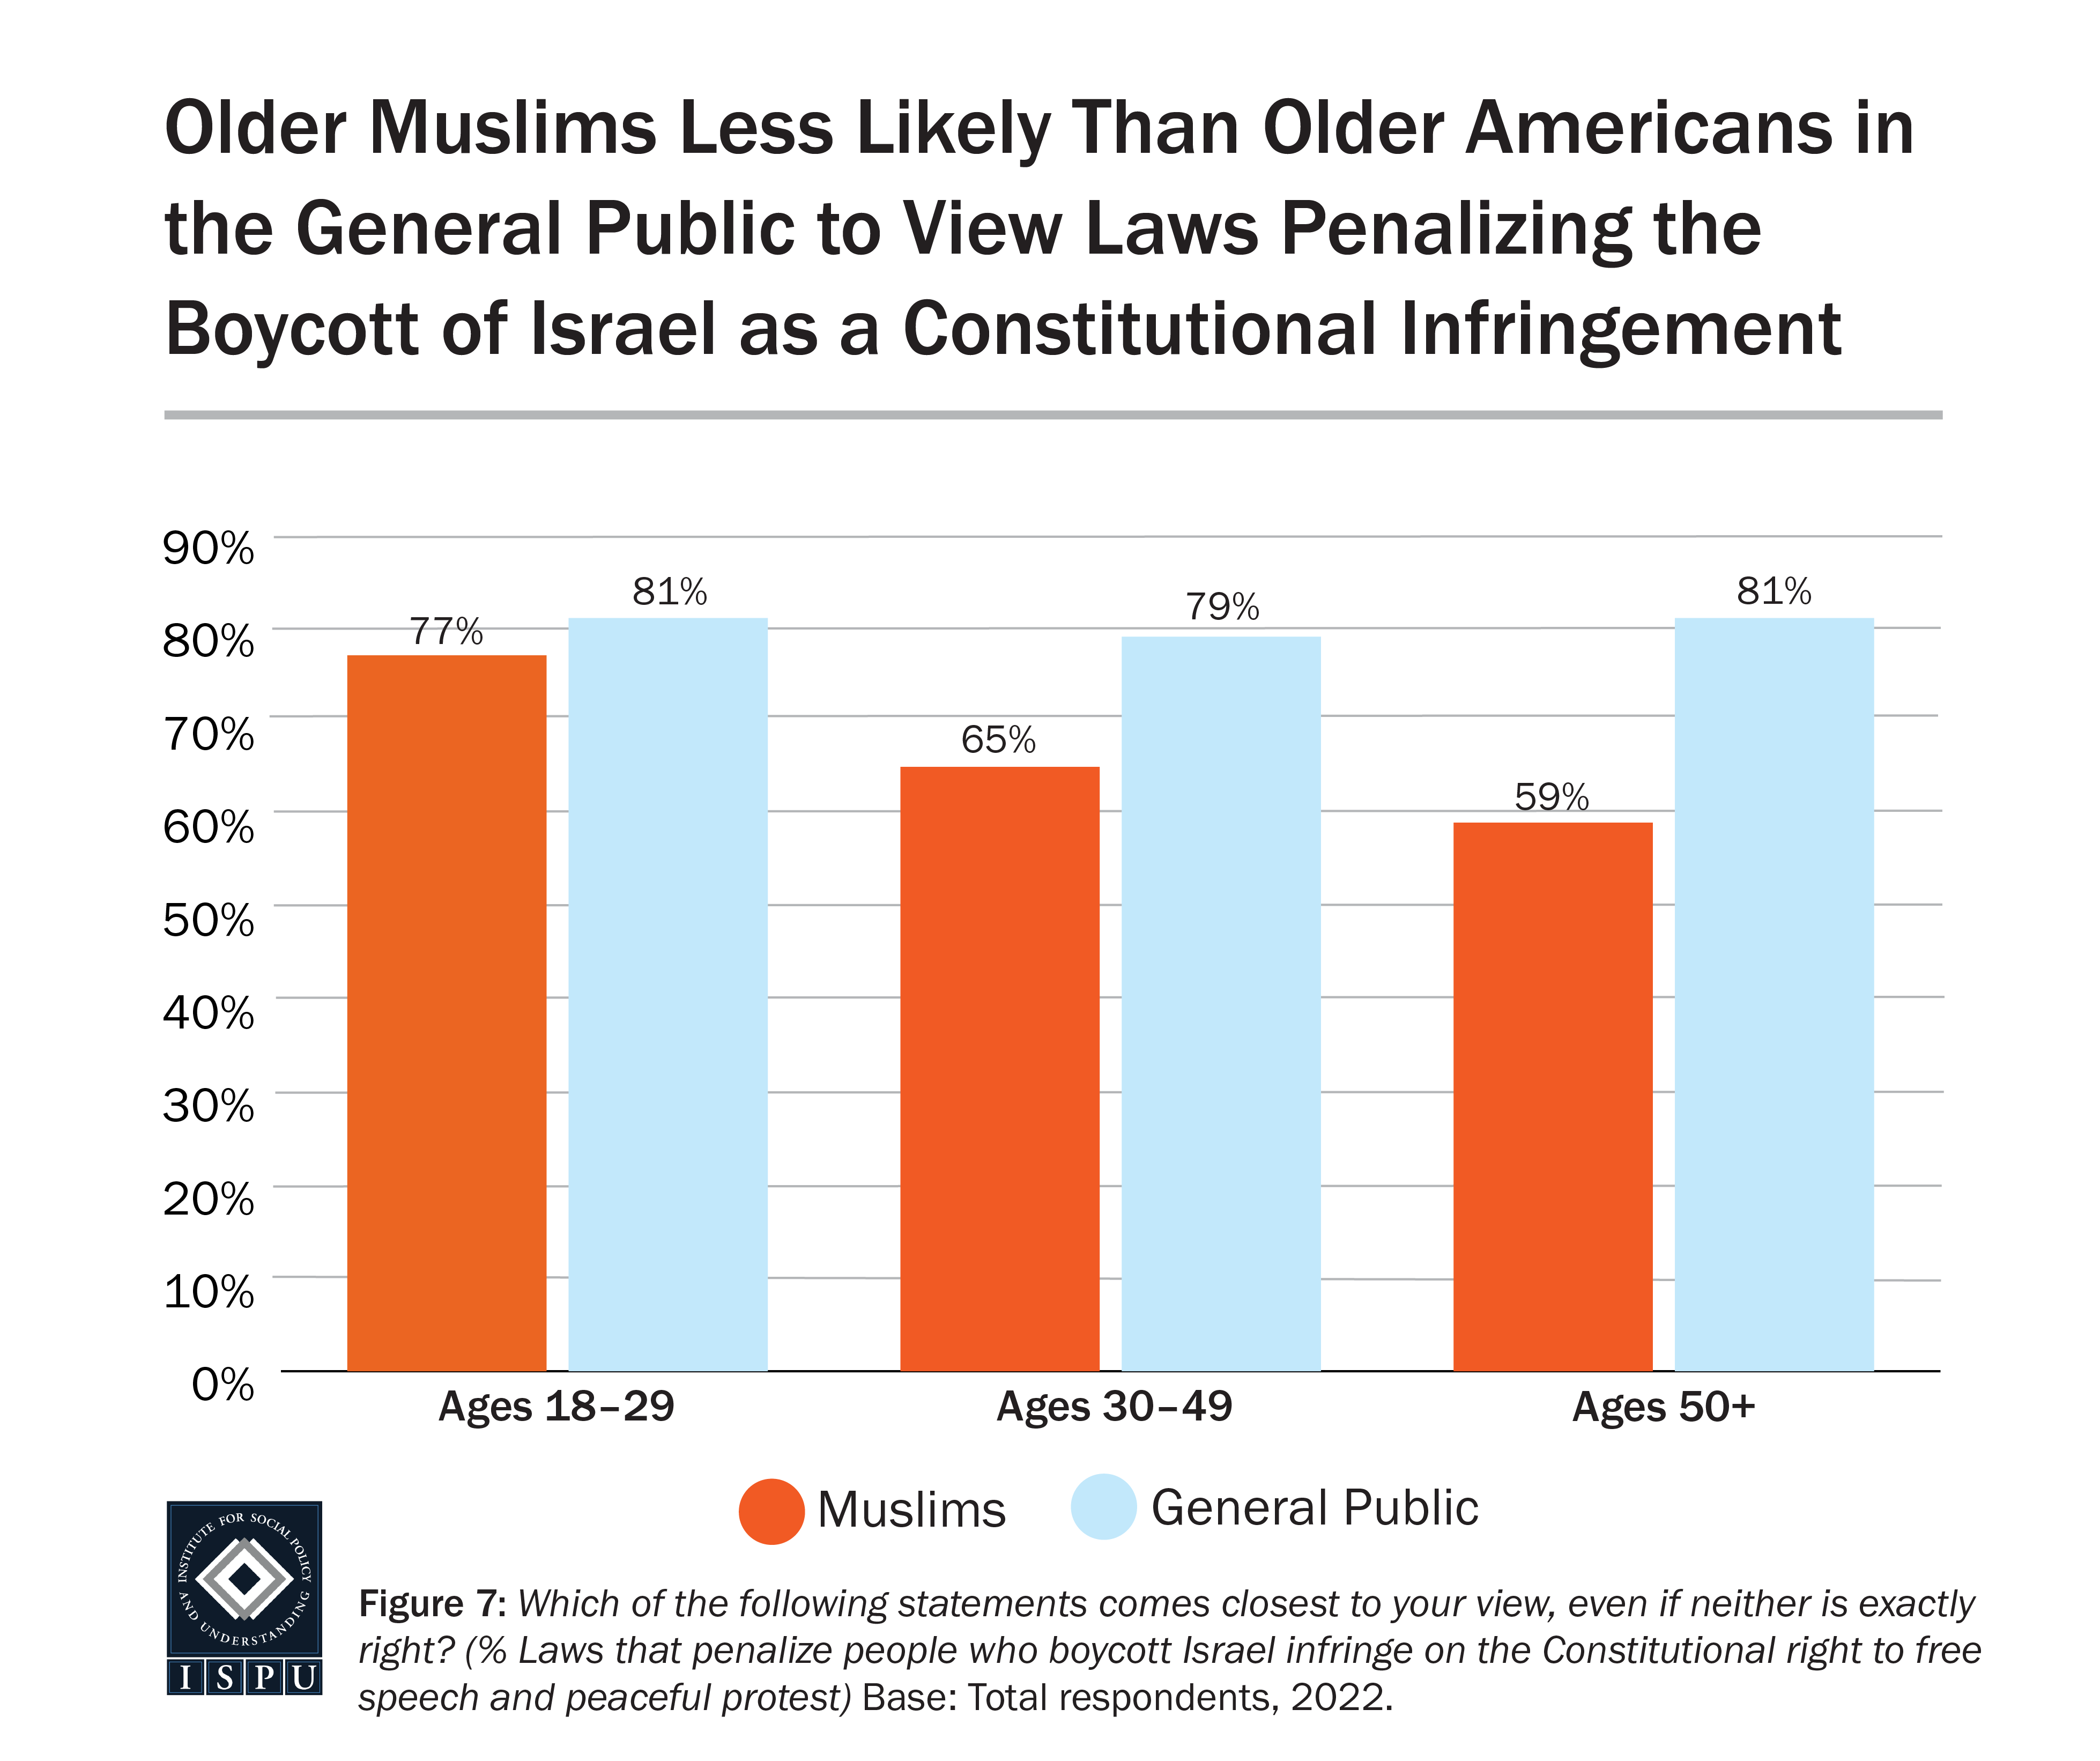 Graph displaying: A bar graph showing that Muslims aged 30-49 and 50 years old and older are less likely than their age counterparts in the general population to view anti-BDS laws a violation of Constitutional rights.